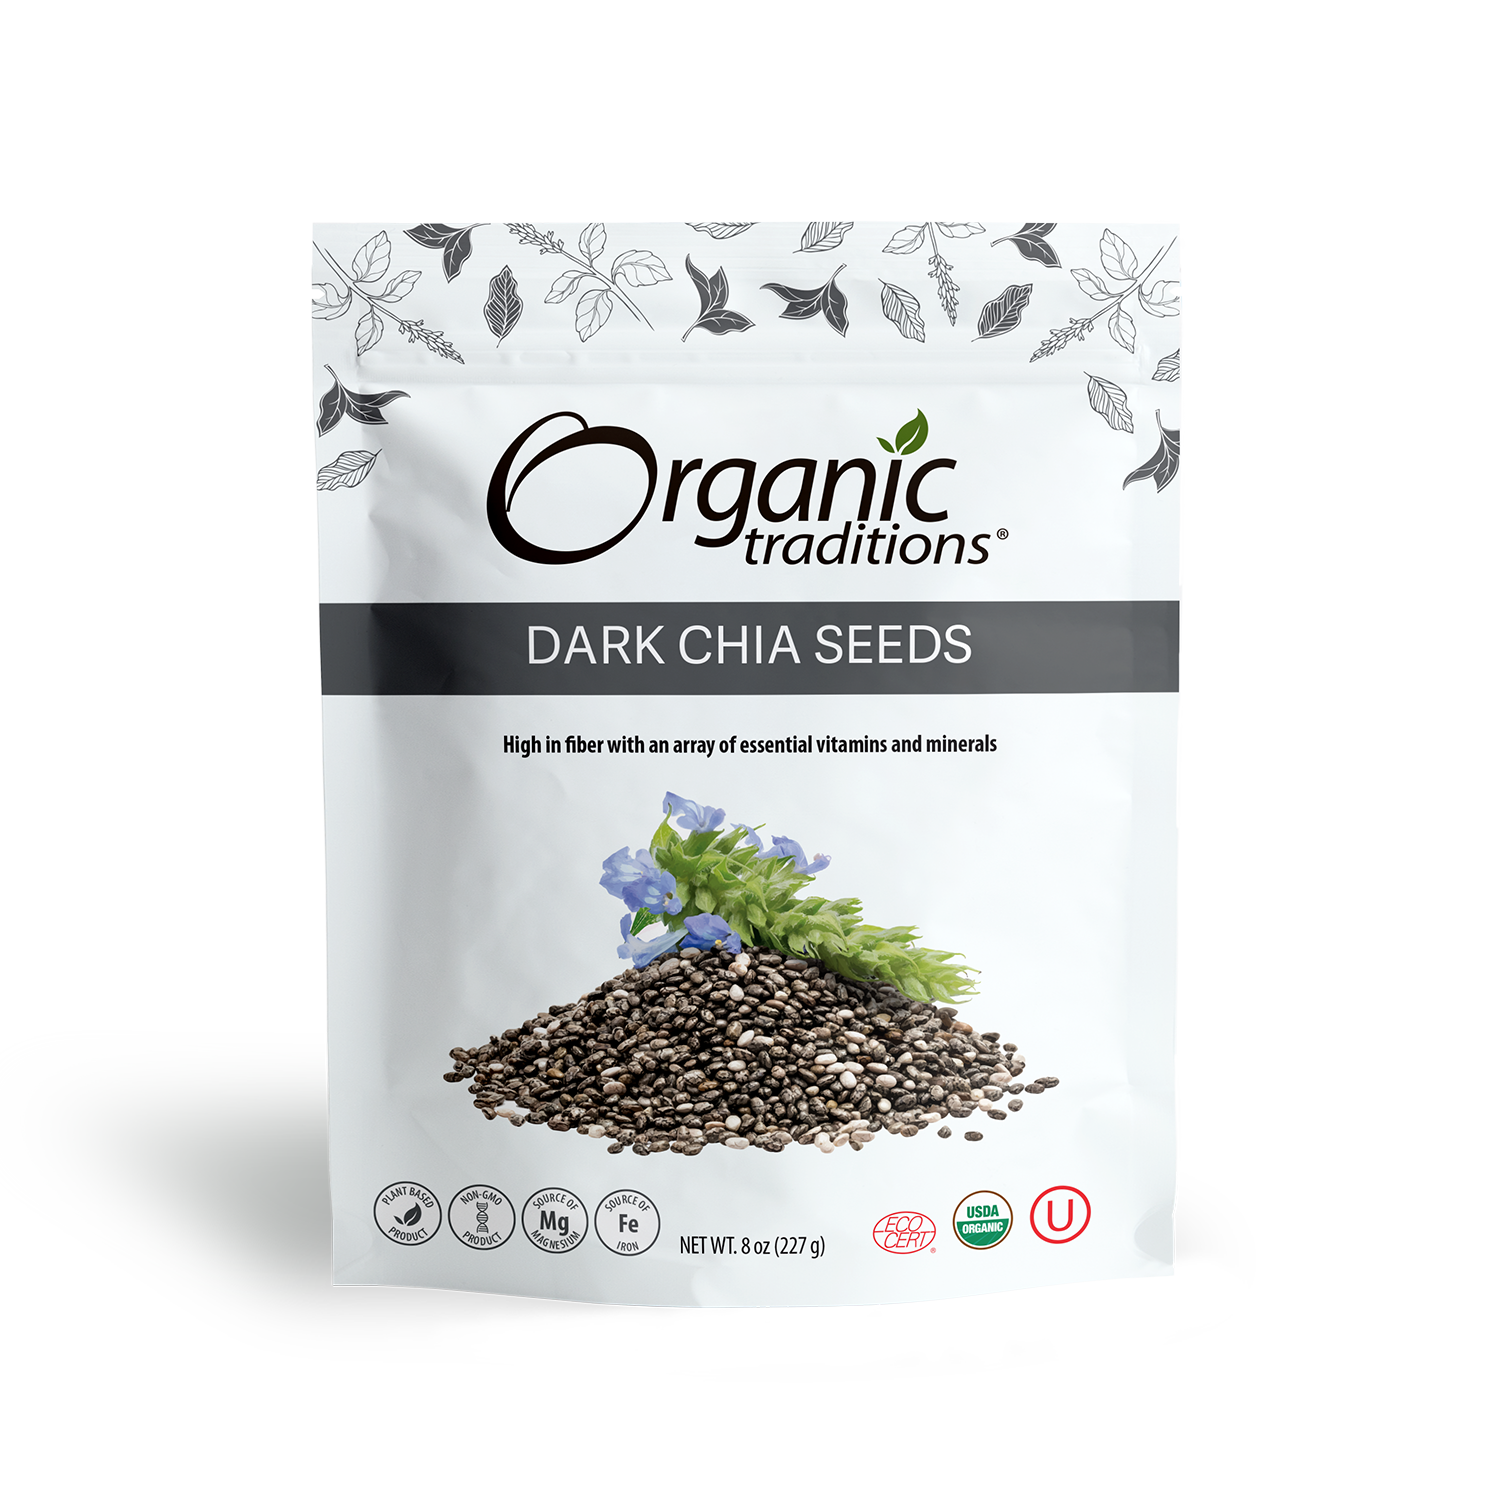 organic traditions dark chia seeds front of bag image